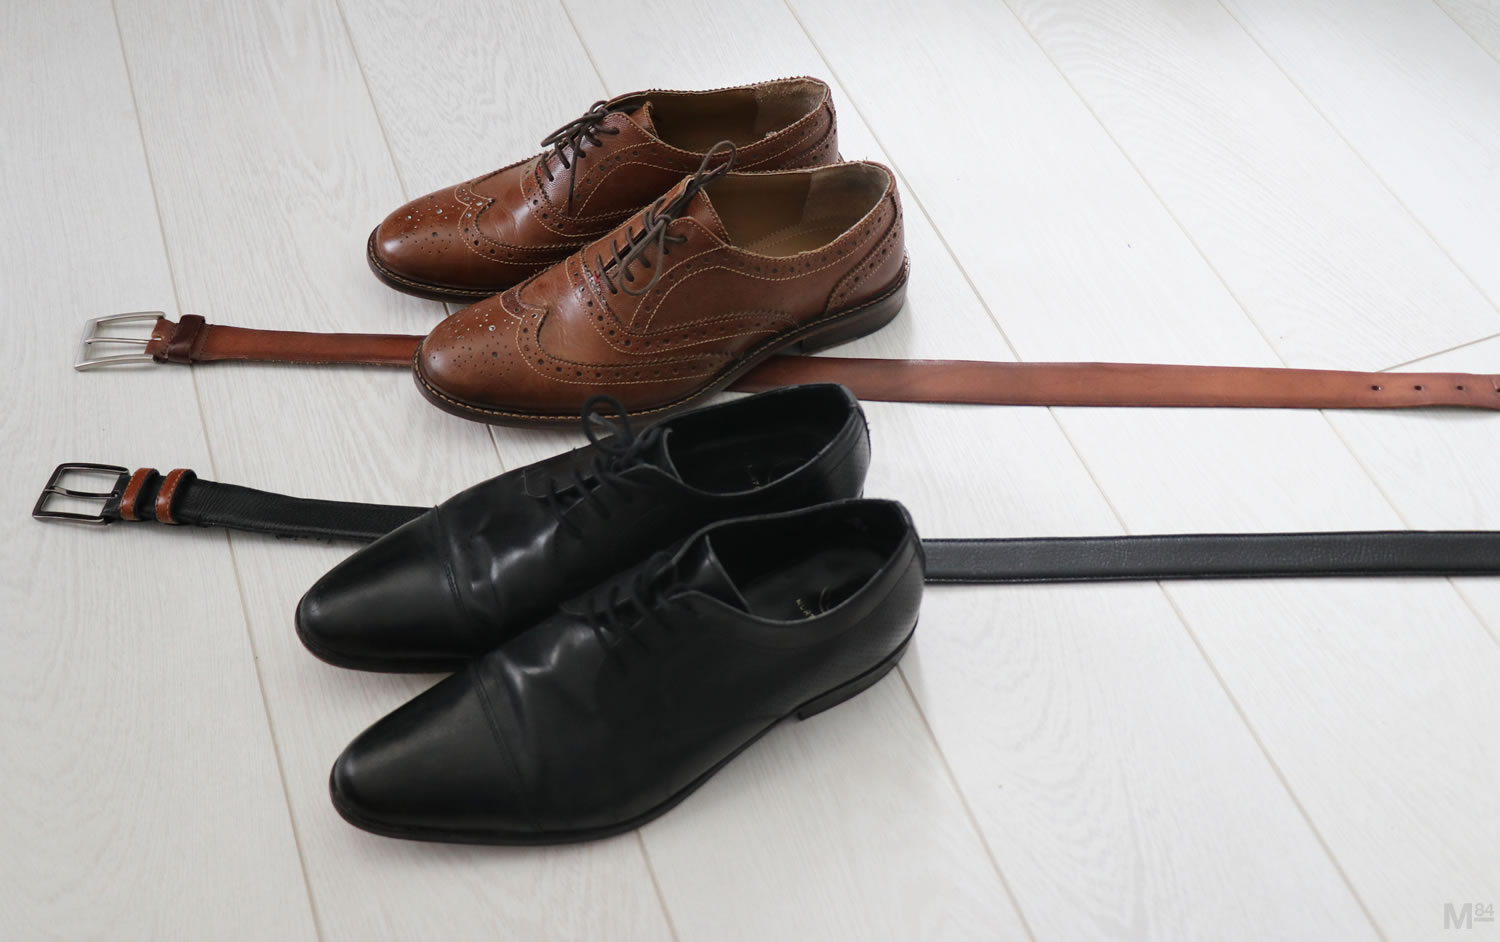 How to: Match shoes with belt - All you need to know